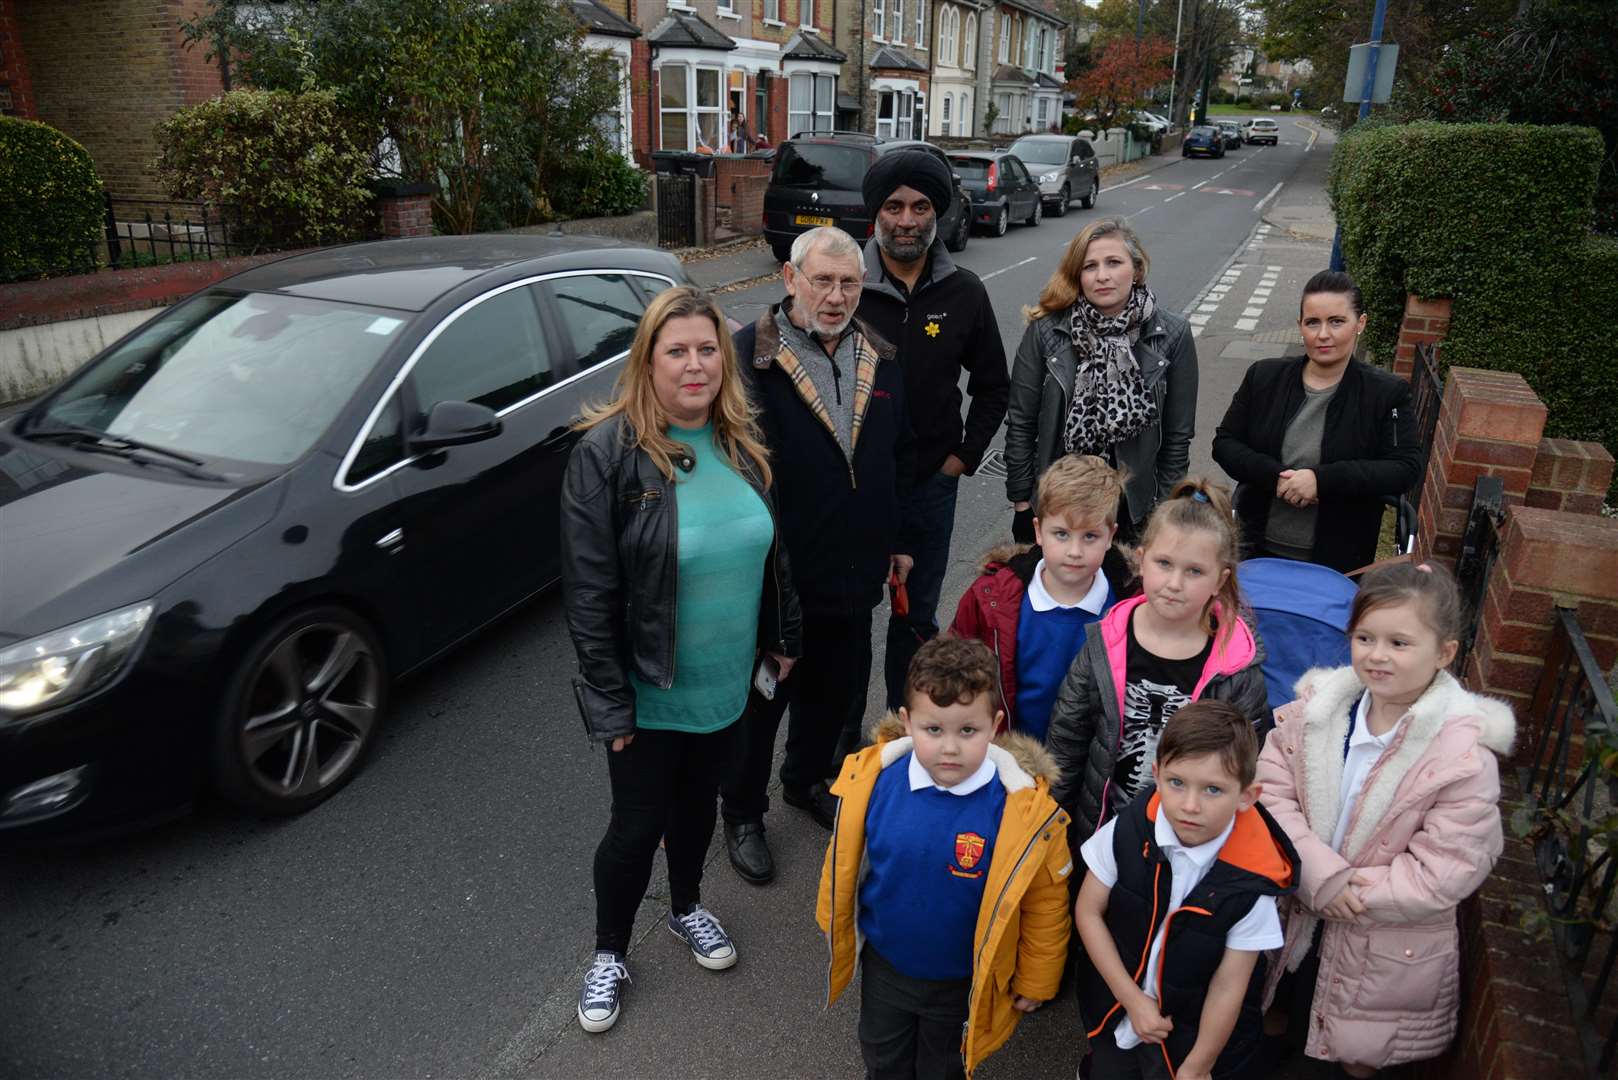 Melanie Weston, Tony Rana and fellow residents of Whitehill Road who have started an e-petition about traffic in Whitehill Road, Gravesend.